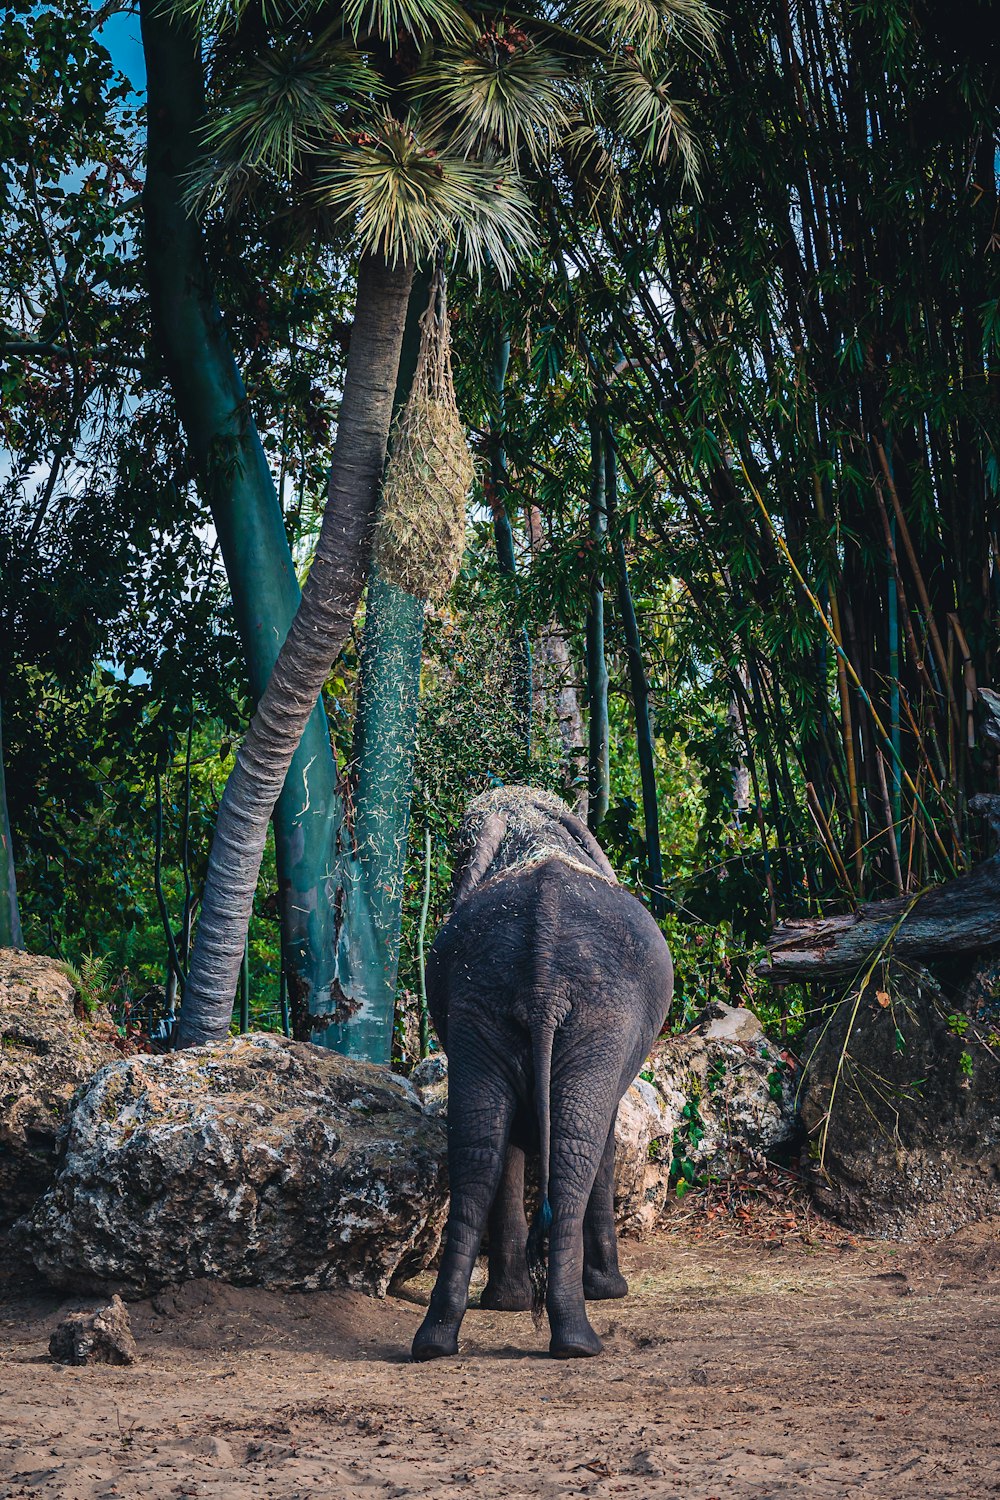 an elephant standing in a dirt field next to a palm tree